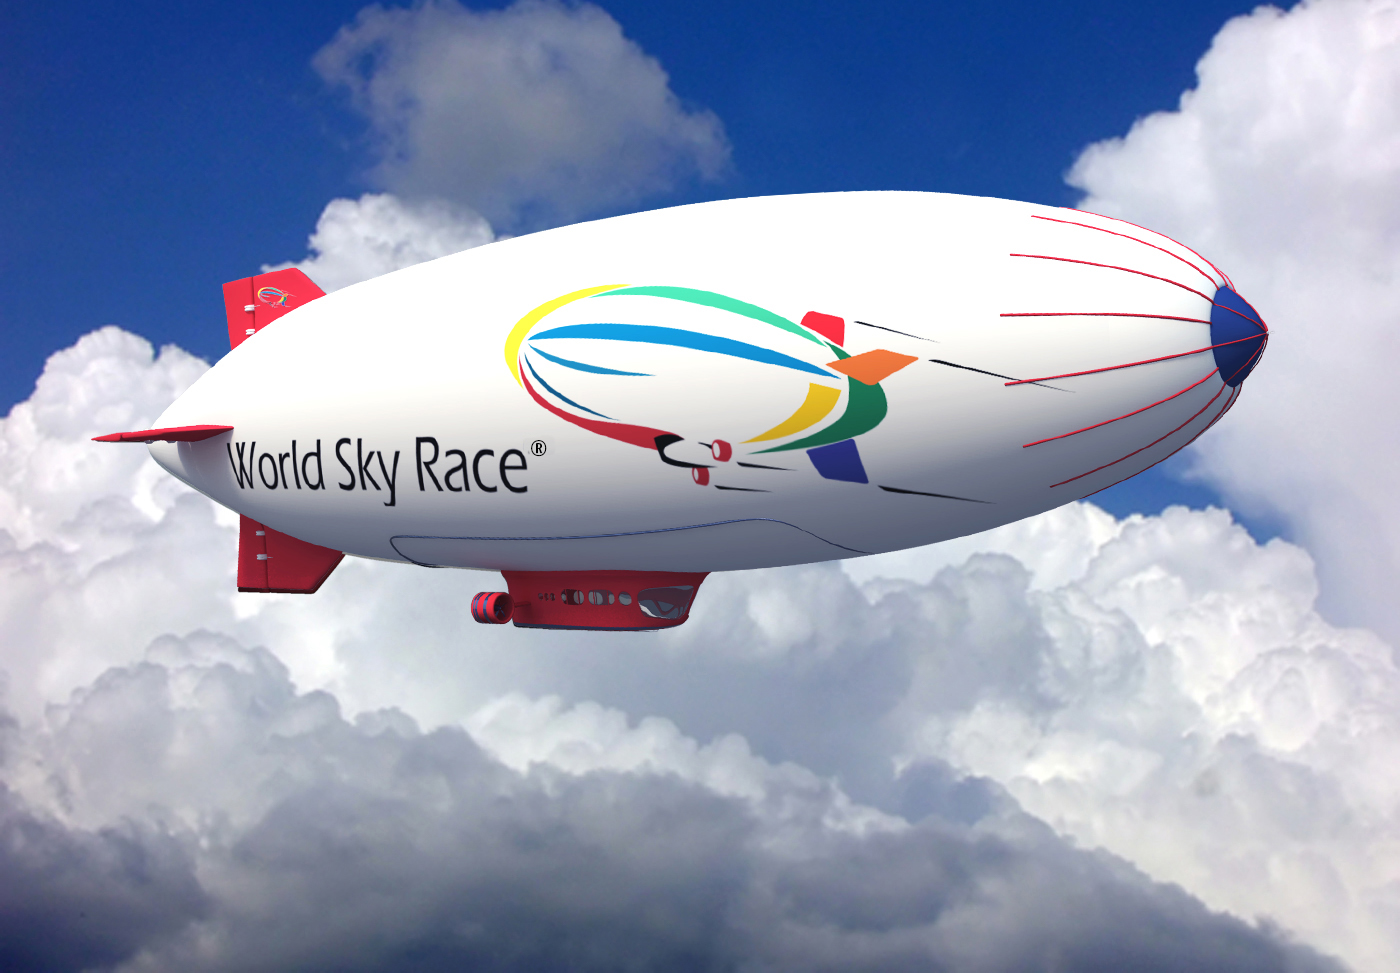 The World Sky Race will launch in London in September 2023 and culminate in Paris in May 2024.